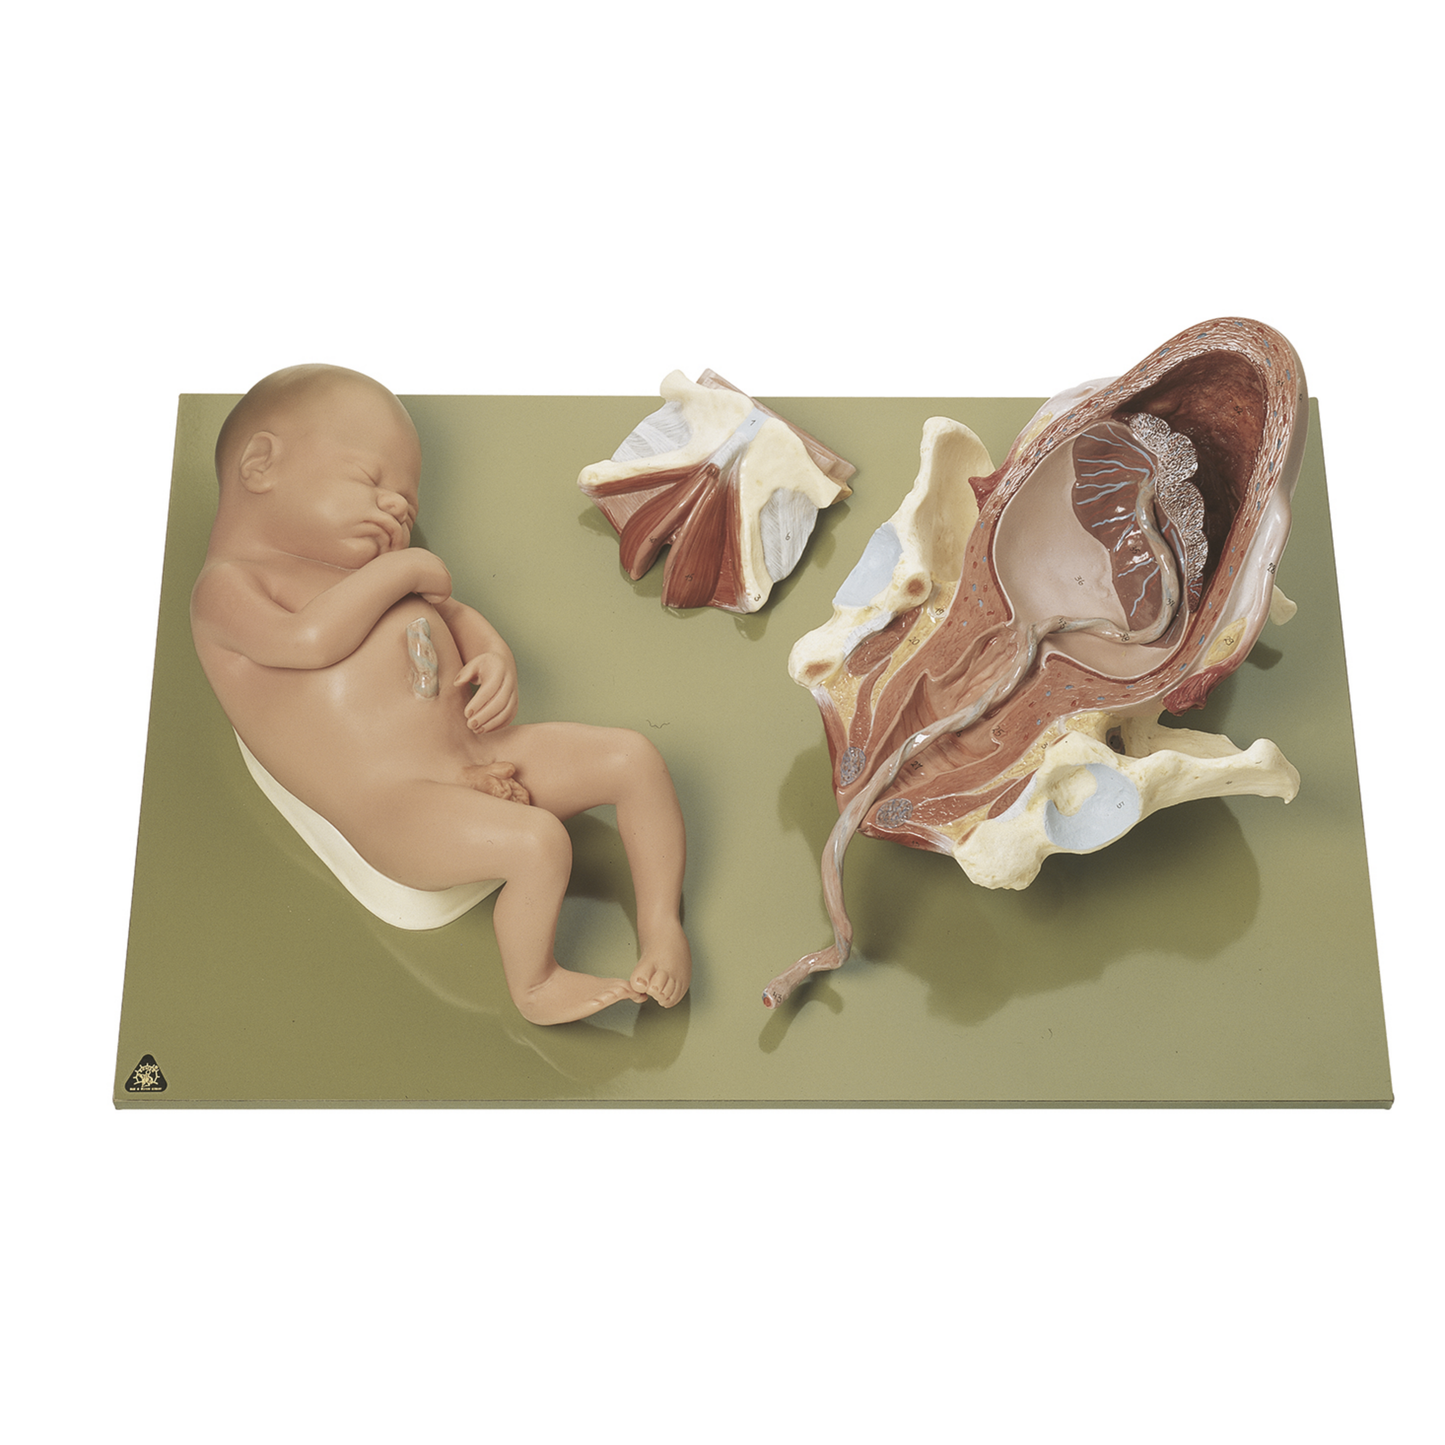 Model of stages of birth, stage 3